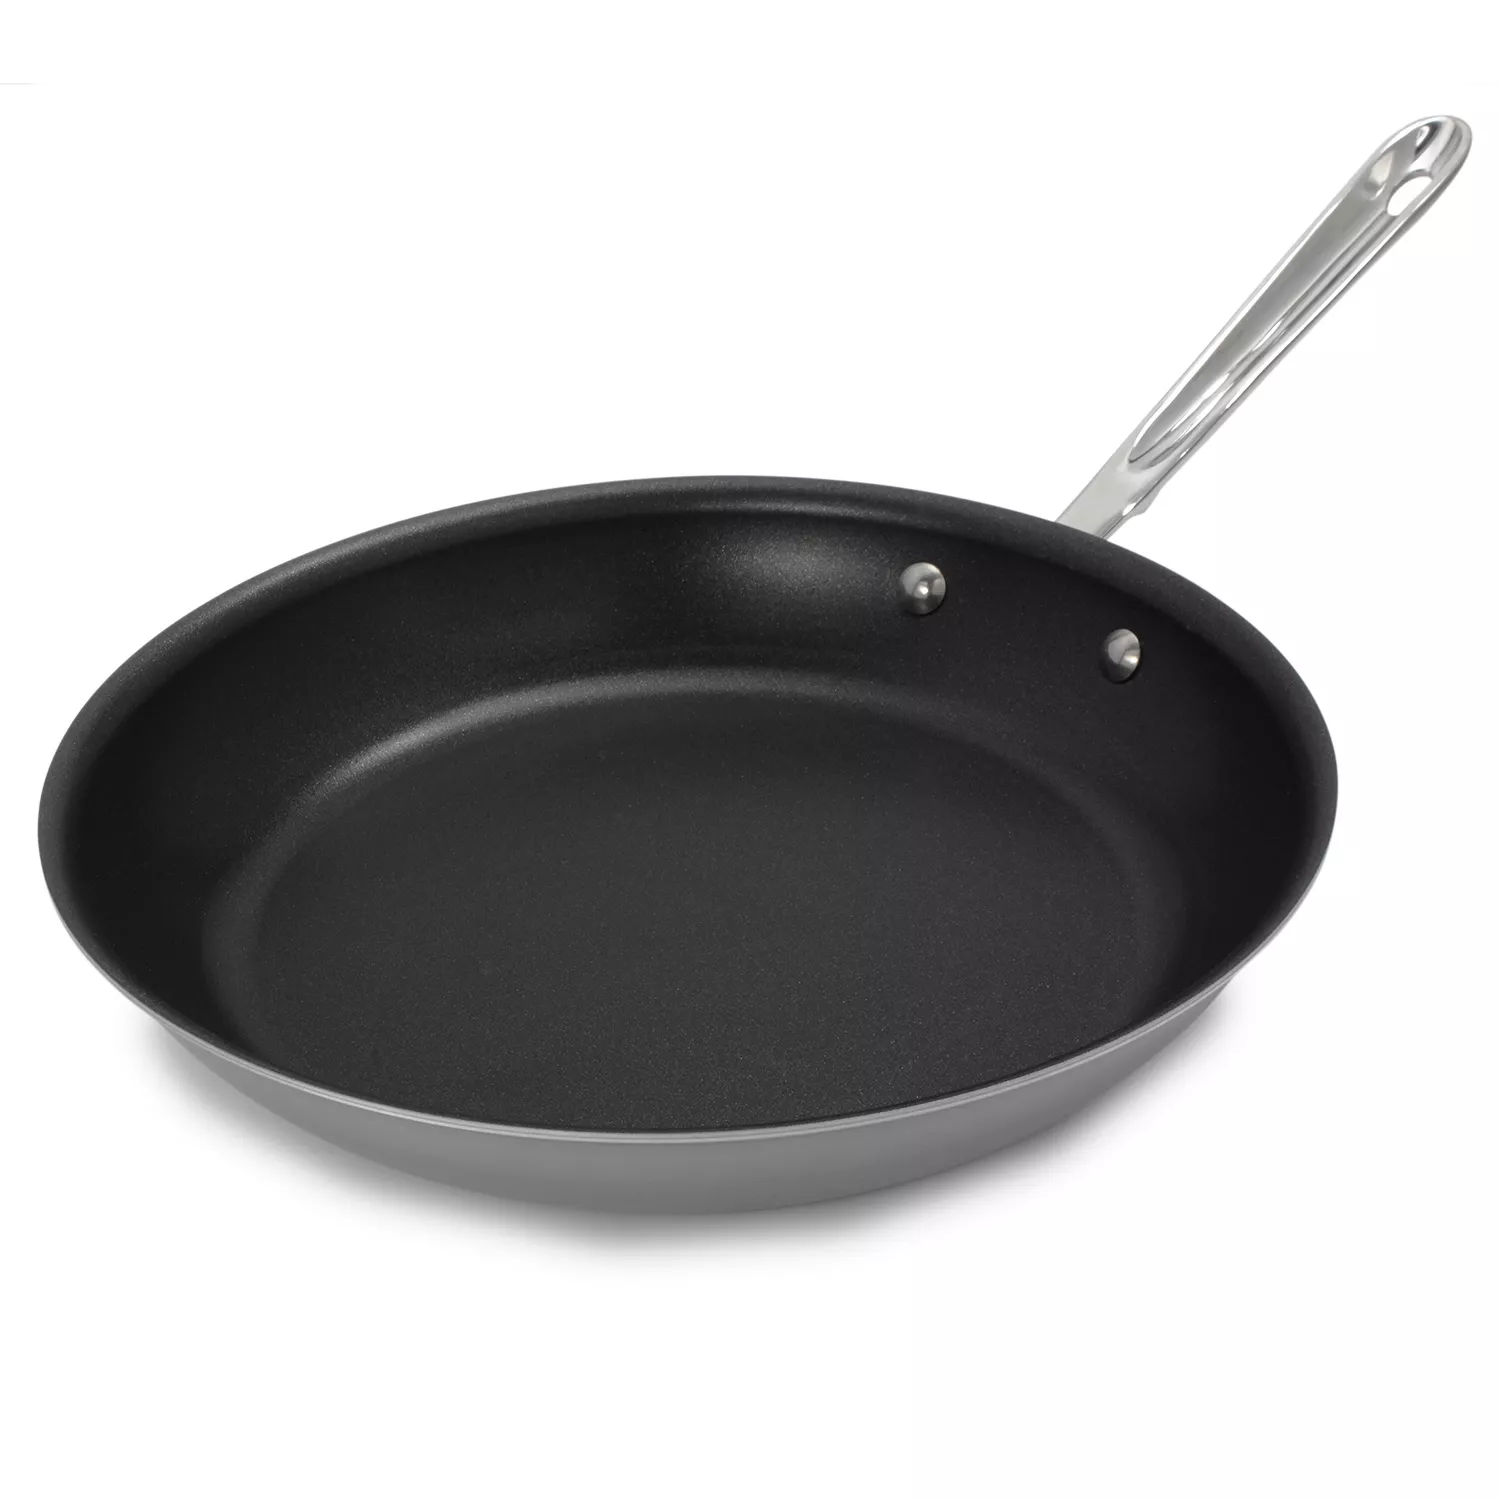 All-Clad d5 Brushed Stainless Steel 12 Non-Stick Fry Pan +